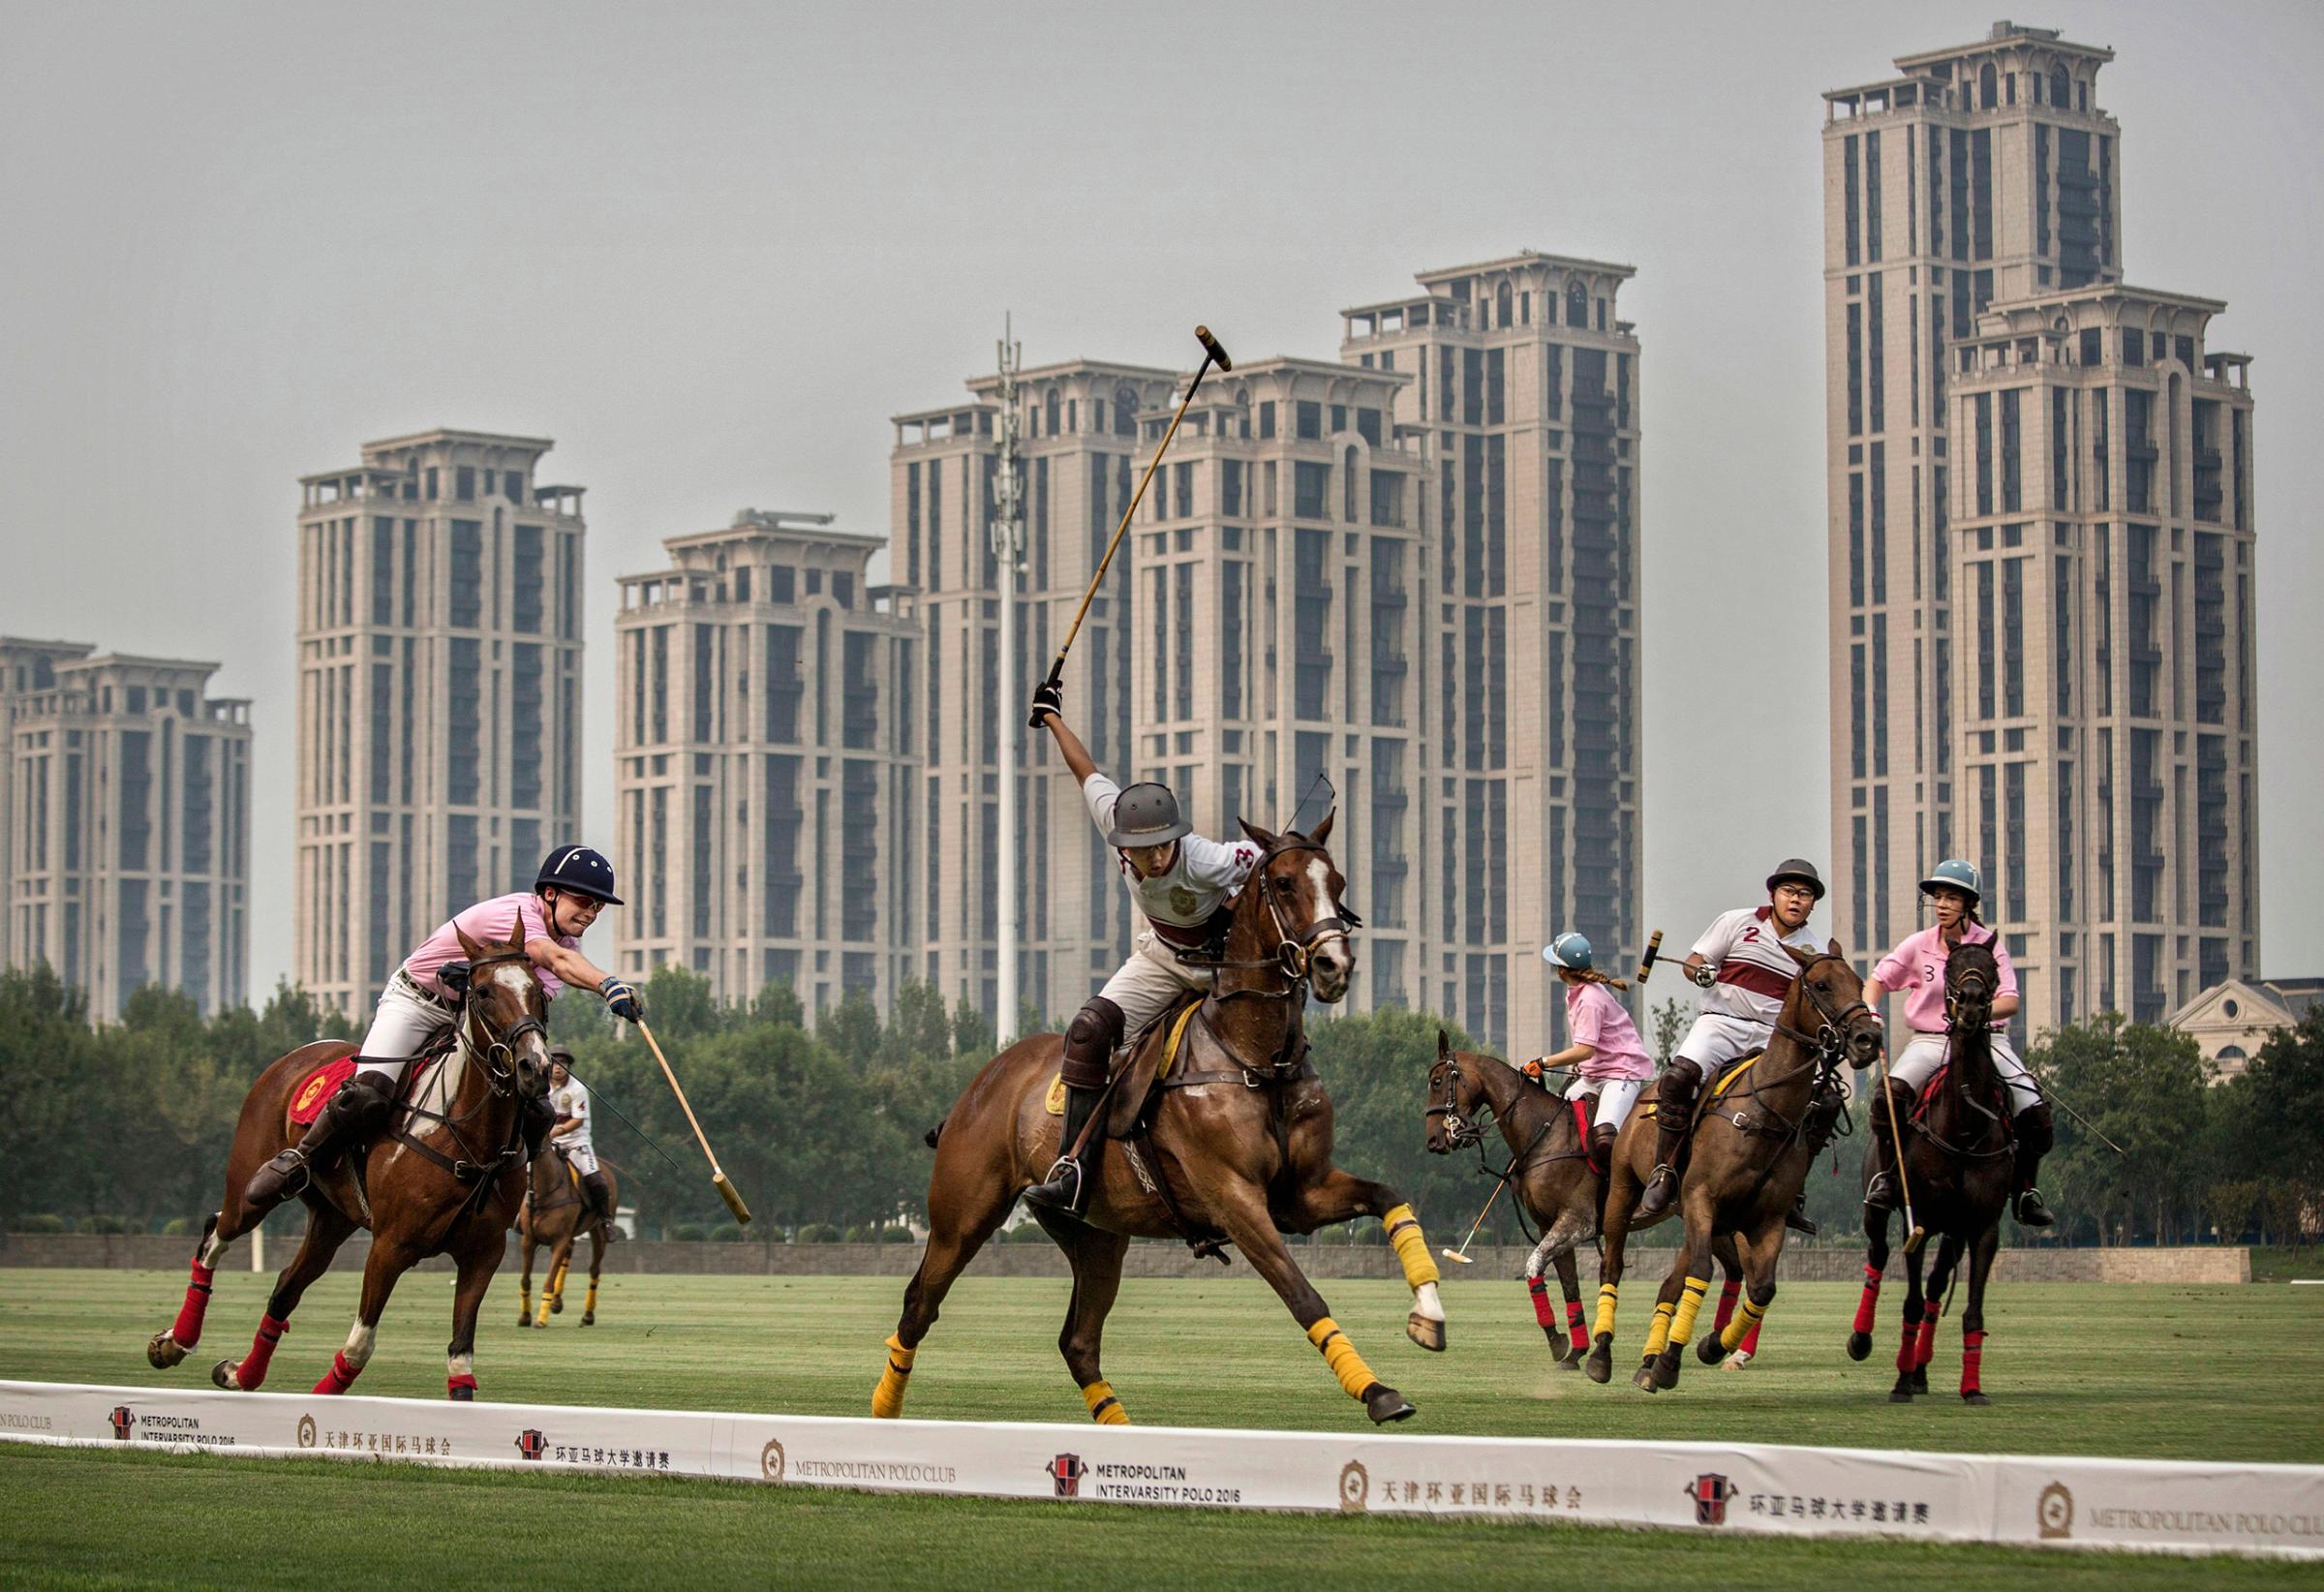 Chinese players from the Metropolitan Polo Club team, in white, and players from the U.S. and Great Britain play an exhibition match at the Tianjin Goldin Metropolitan Polo Club in Tianjin, China, on July 17, 2016.